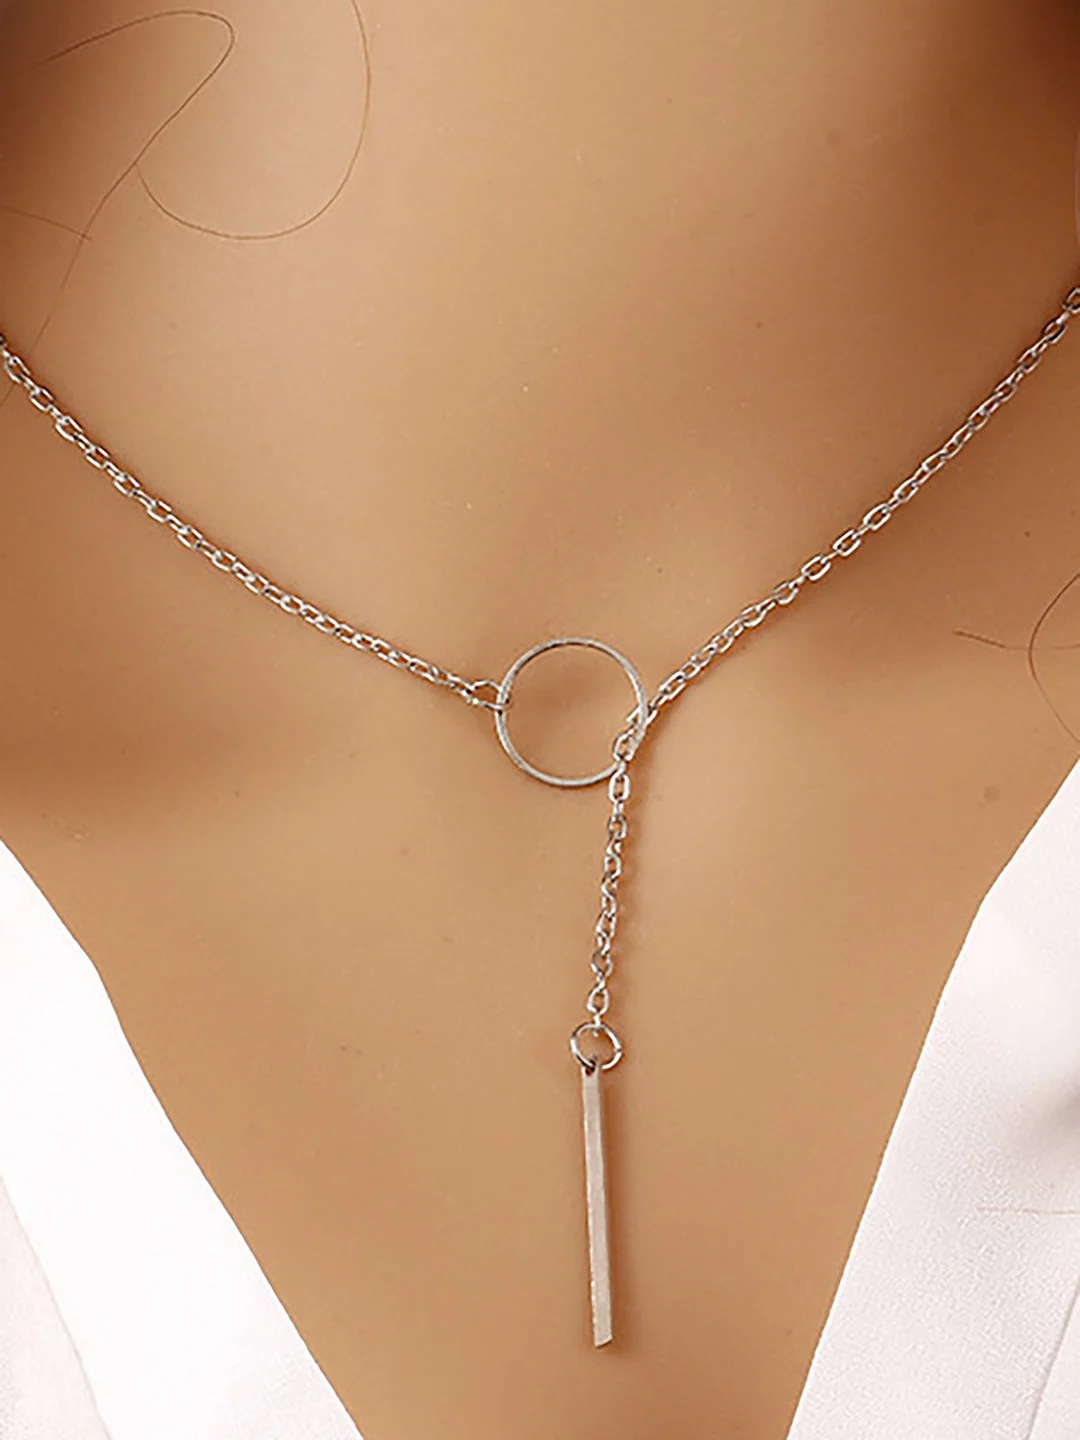 Womens Simple Alloy Ring Necklace | EGEMISS